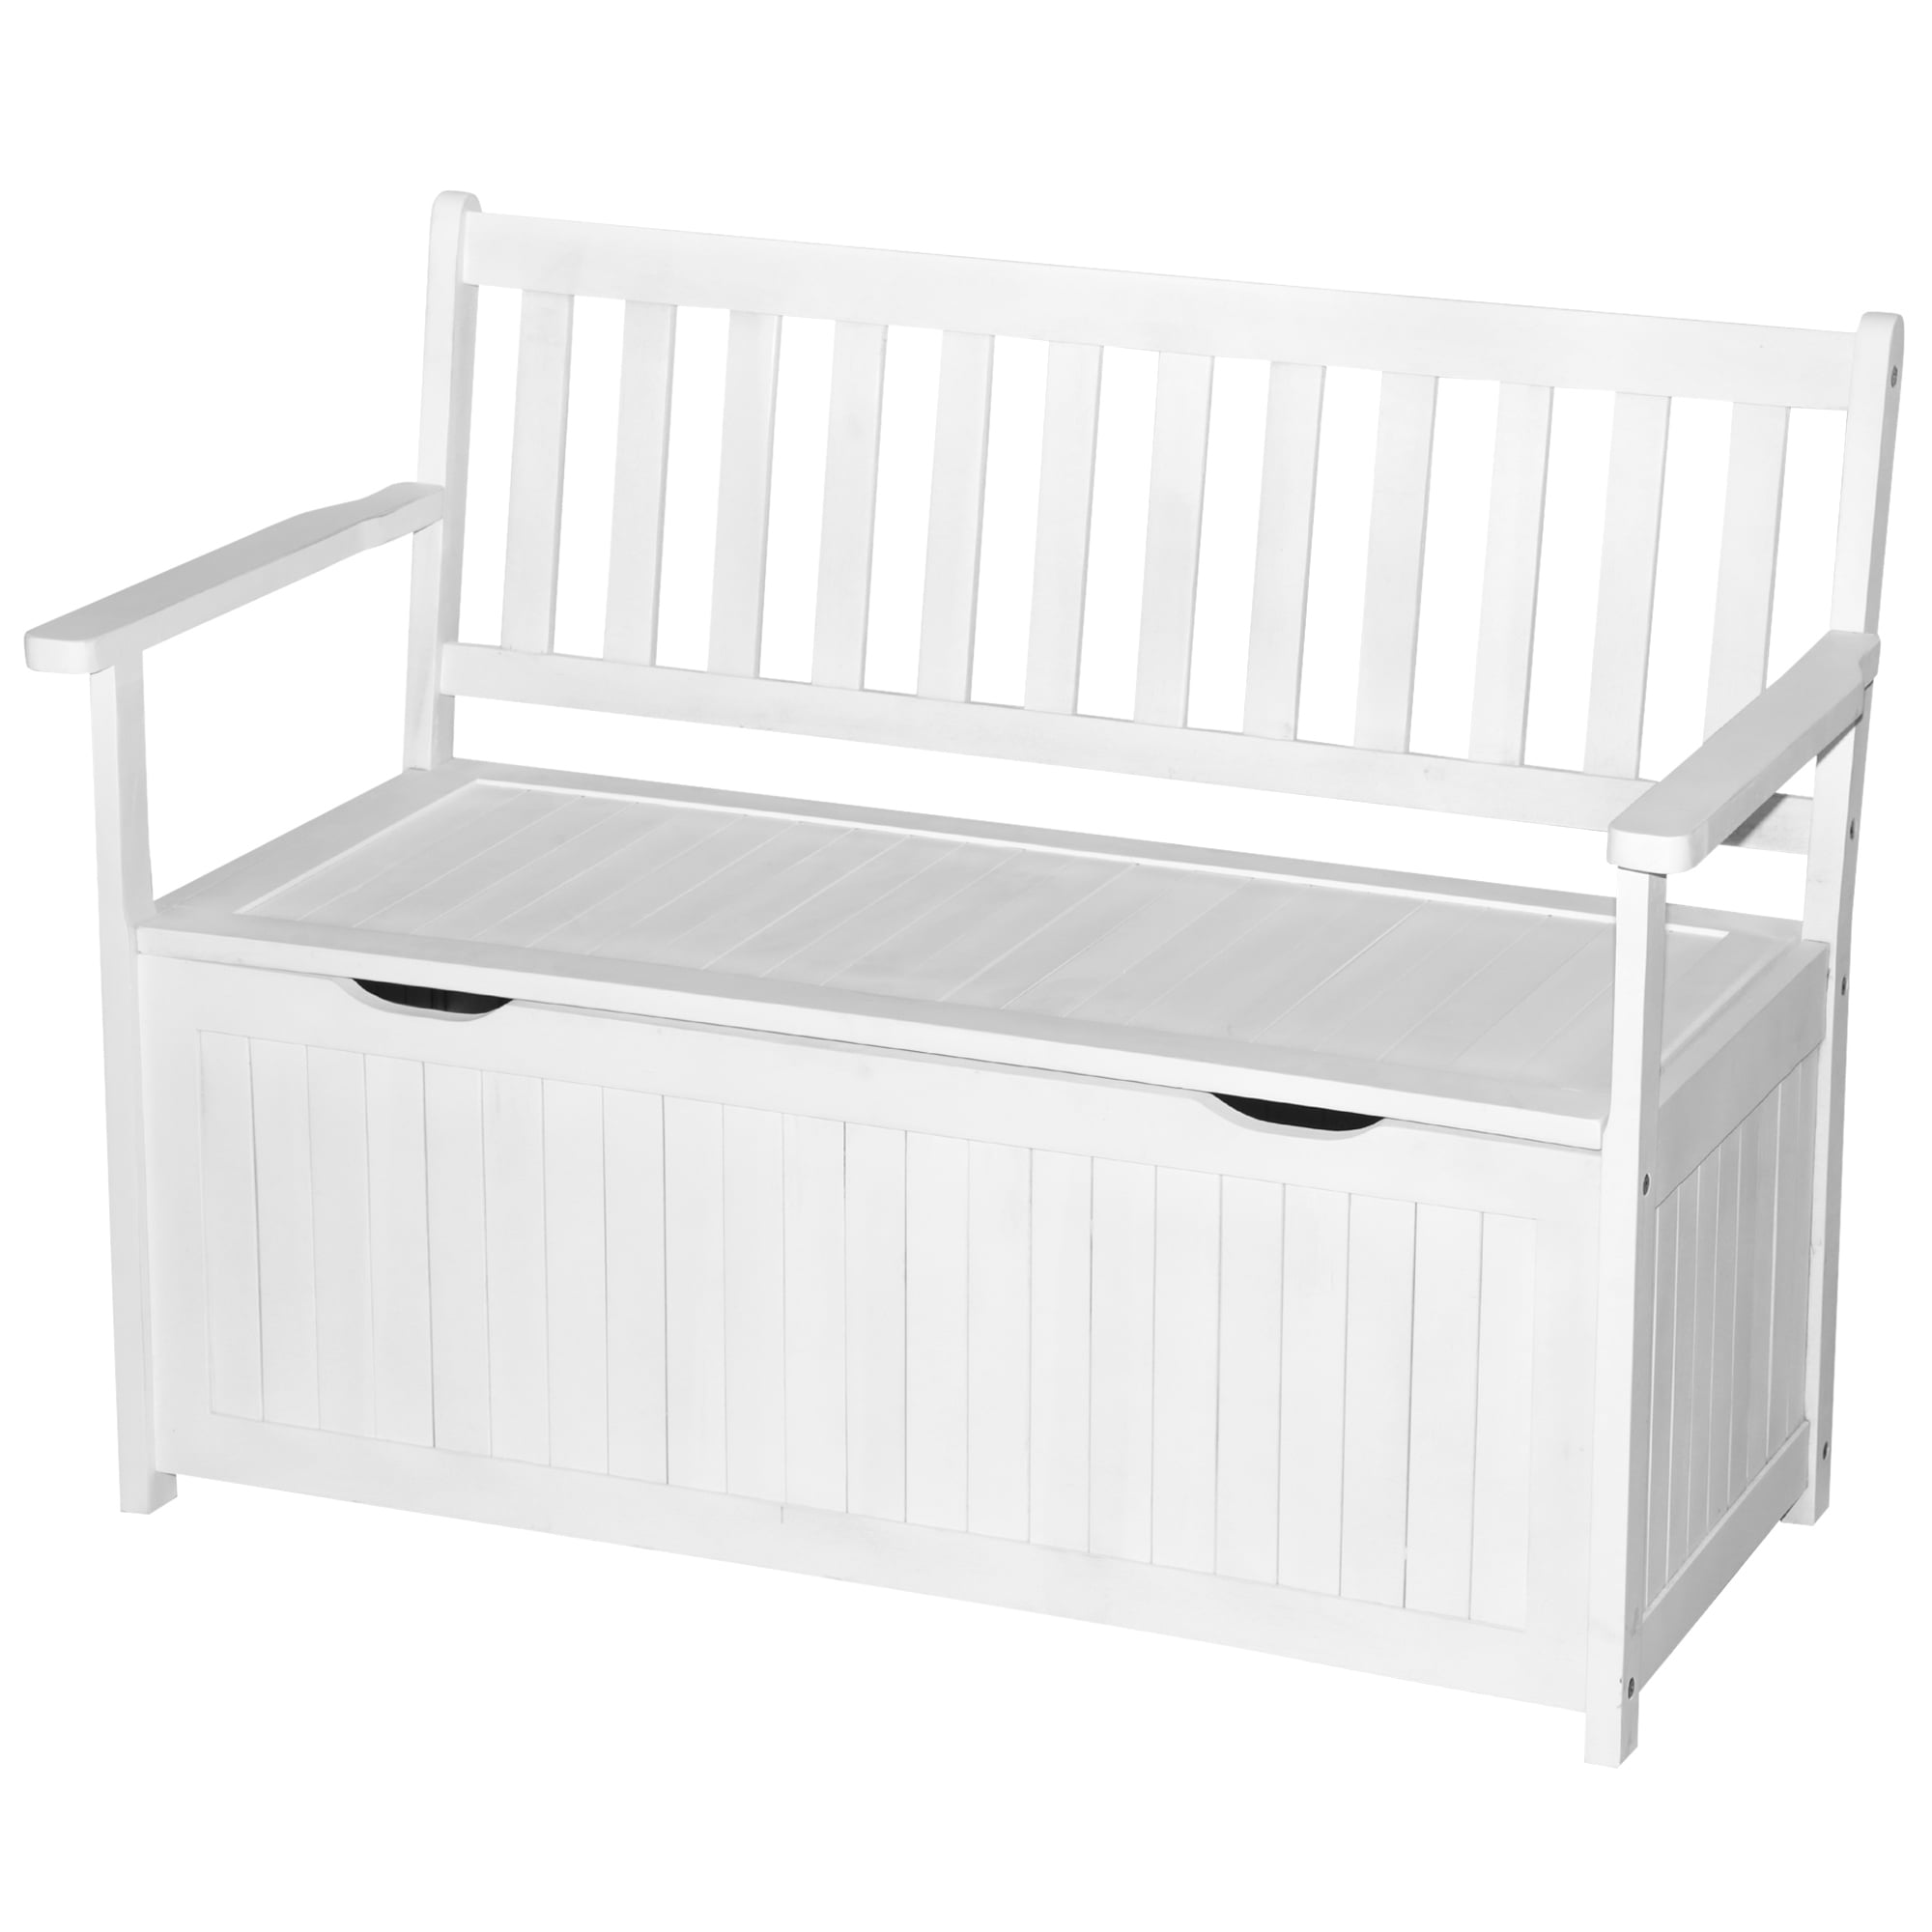 Outsunny Outdoor Storage Acacia Wood, White Outdoor Patio Bench With Storage